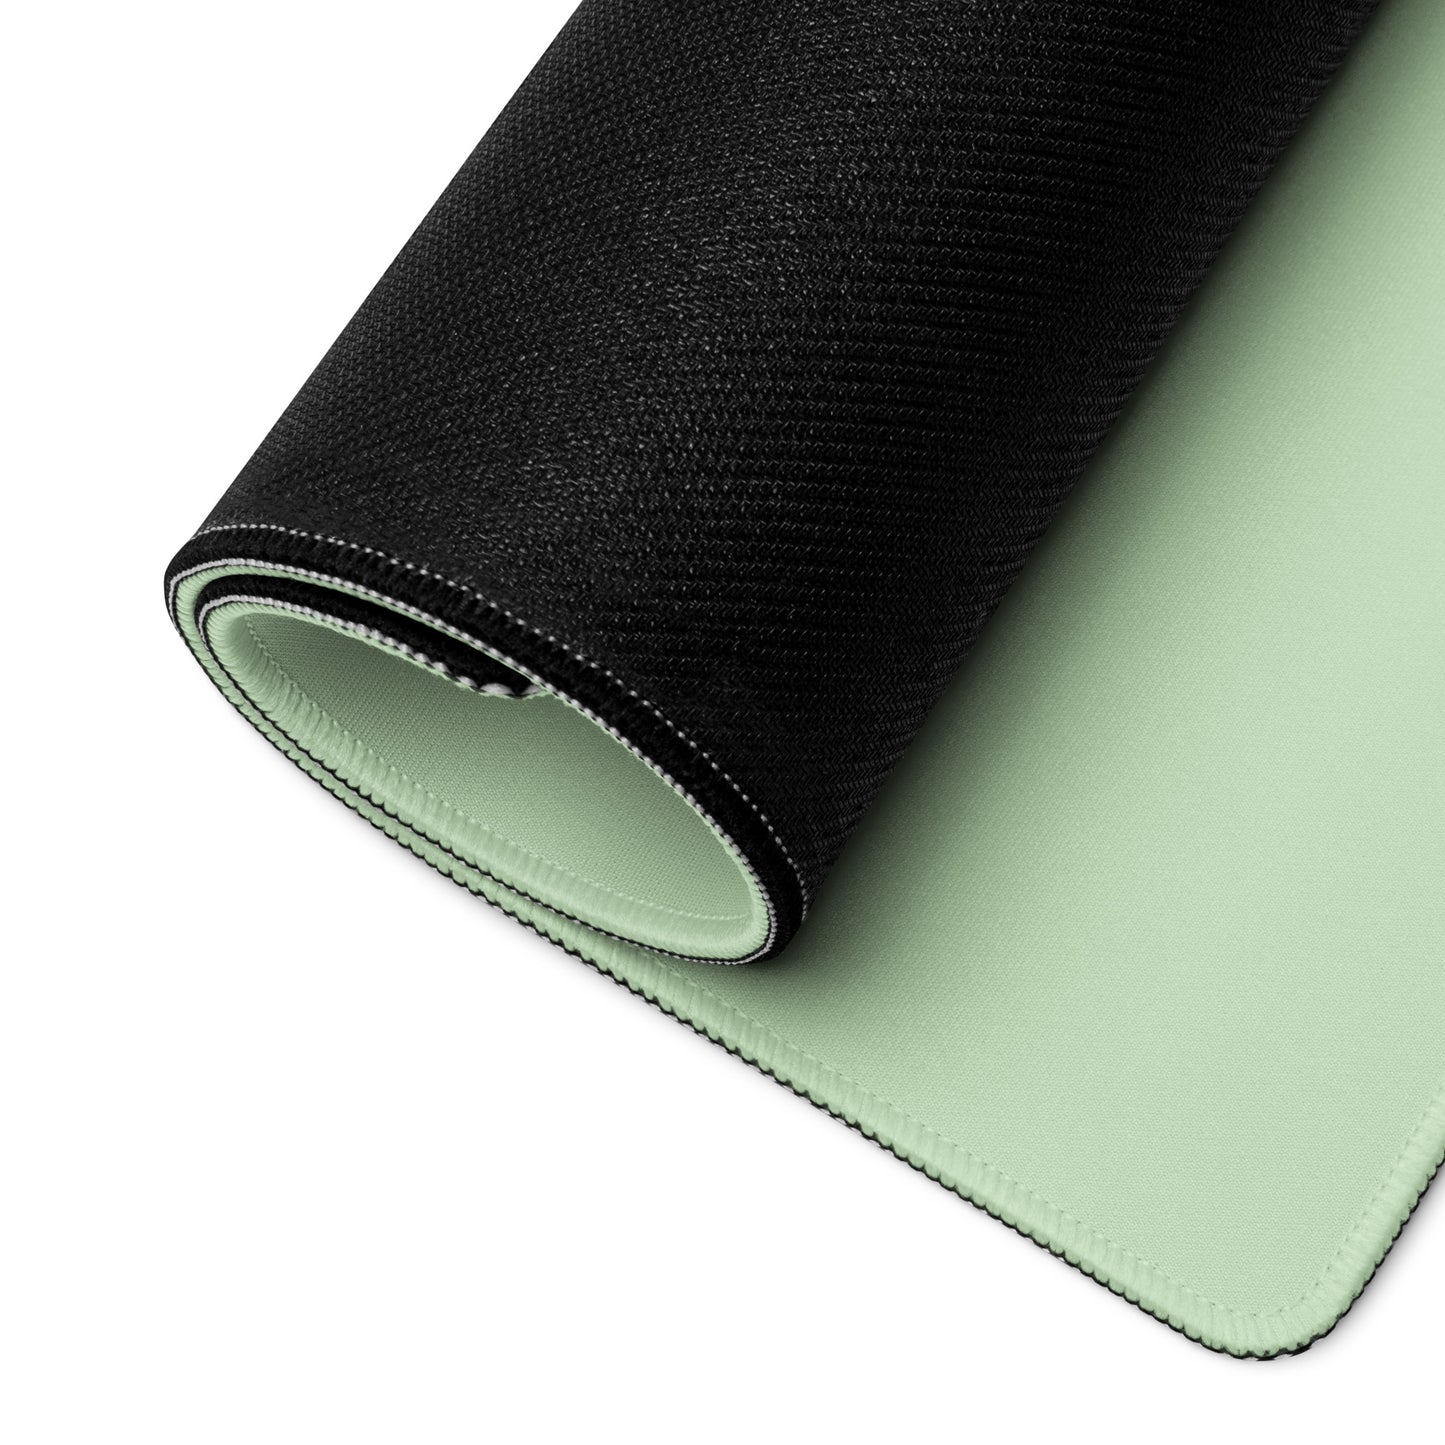 A 36" x 18" desk pad with a cute frog on it rolled up. Green in color.